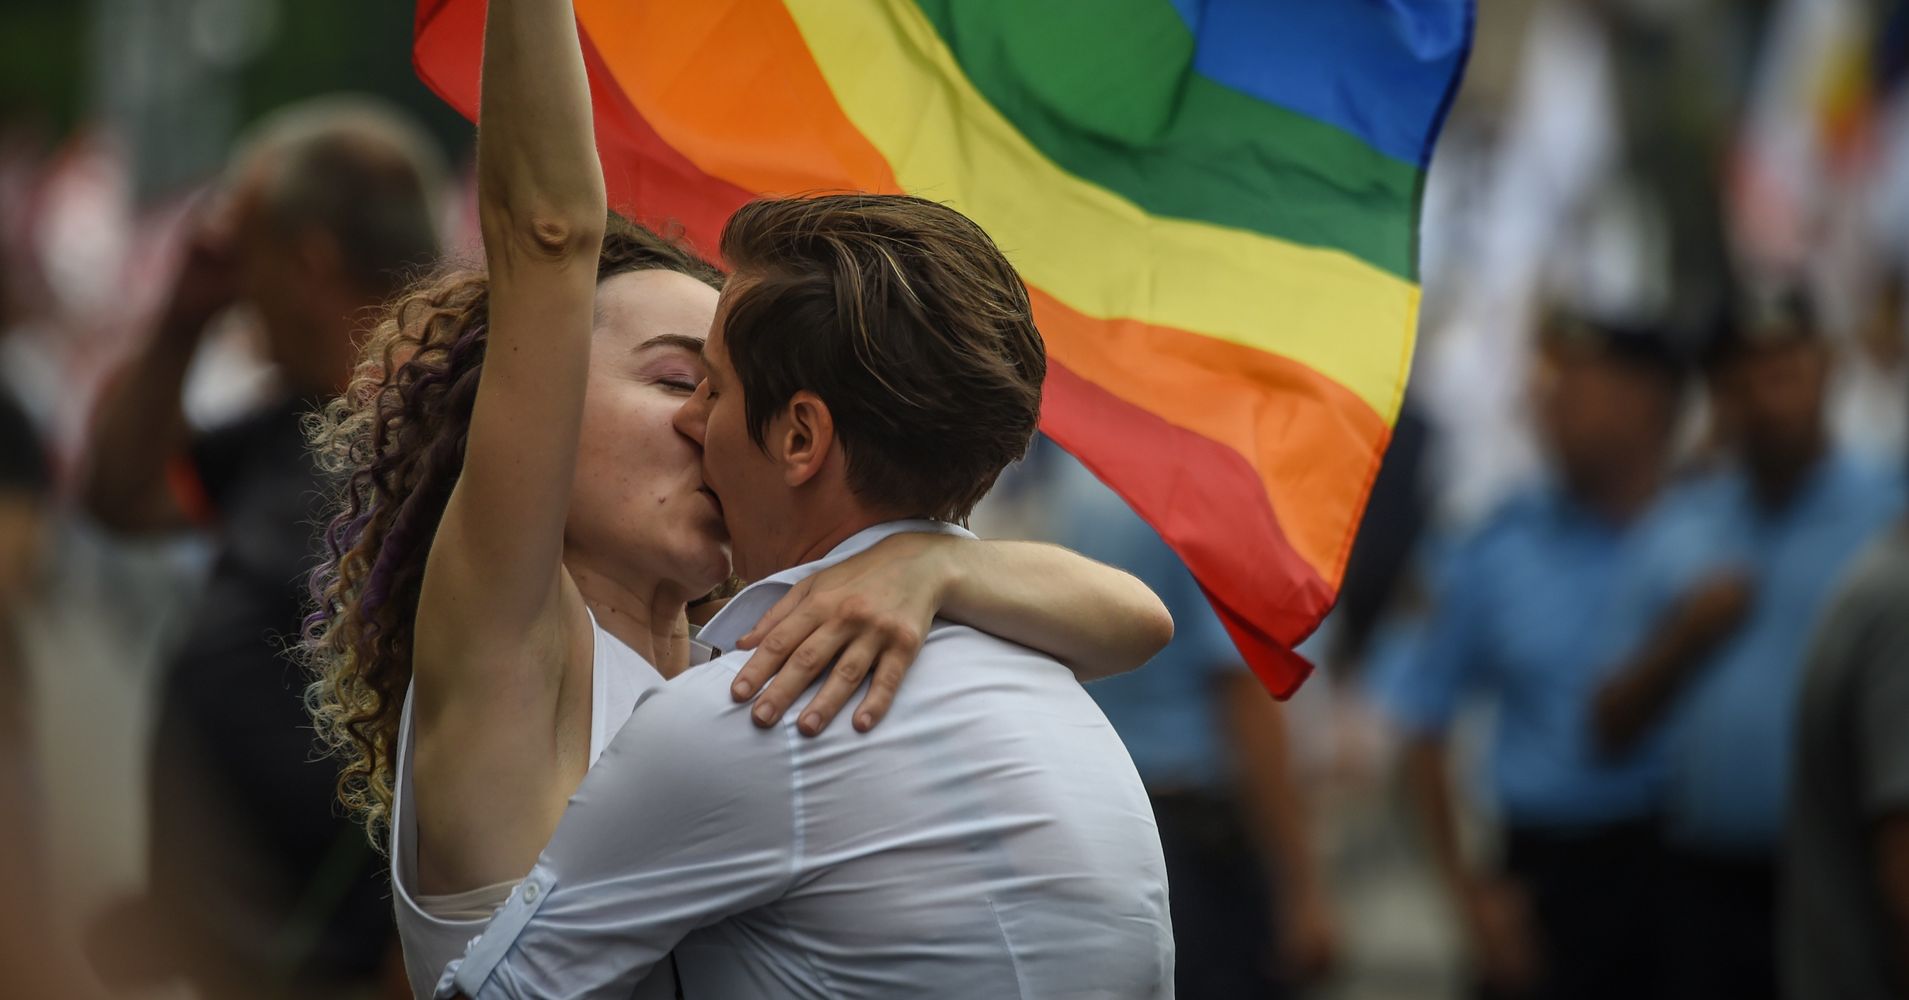 Romania S Top Court Rules Lgbtq Couples Should Have Legal